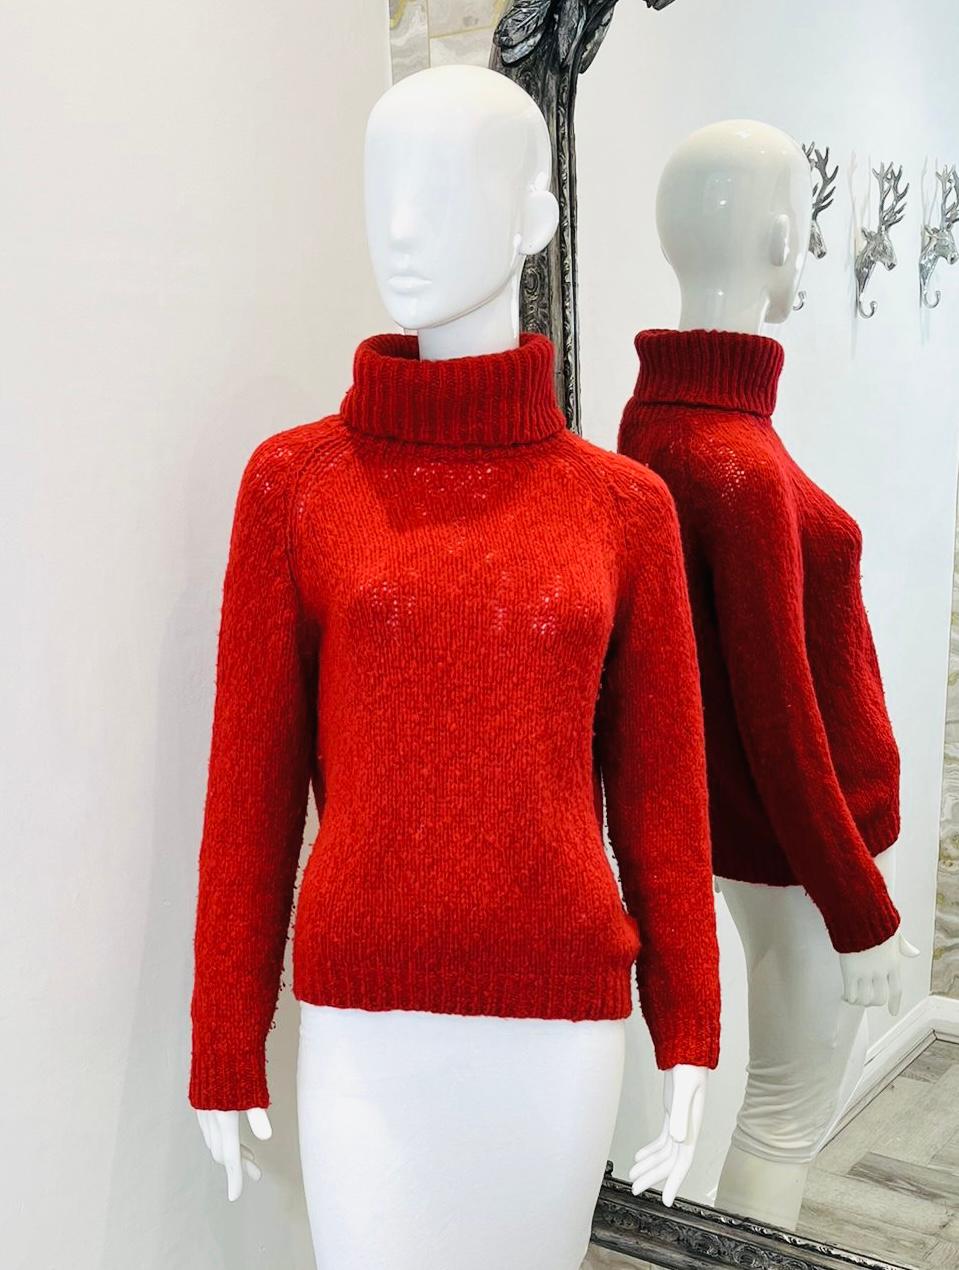 Isabel Marant Virgin Wool & Angora Roll Neck Jumper

Bright red knitwear designed with chunky roll neck and long sleeves.

Featuring regular fit, ribbed cuffs and hem.

Size – 3 - L

Condition – Very Good

Composition – 60% Virgin Wool, 30%